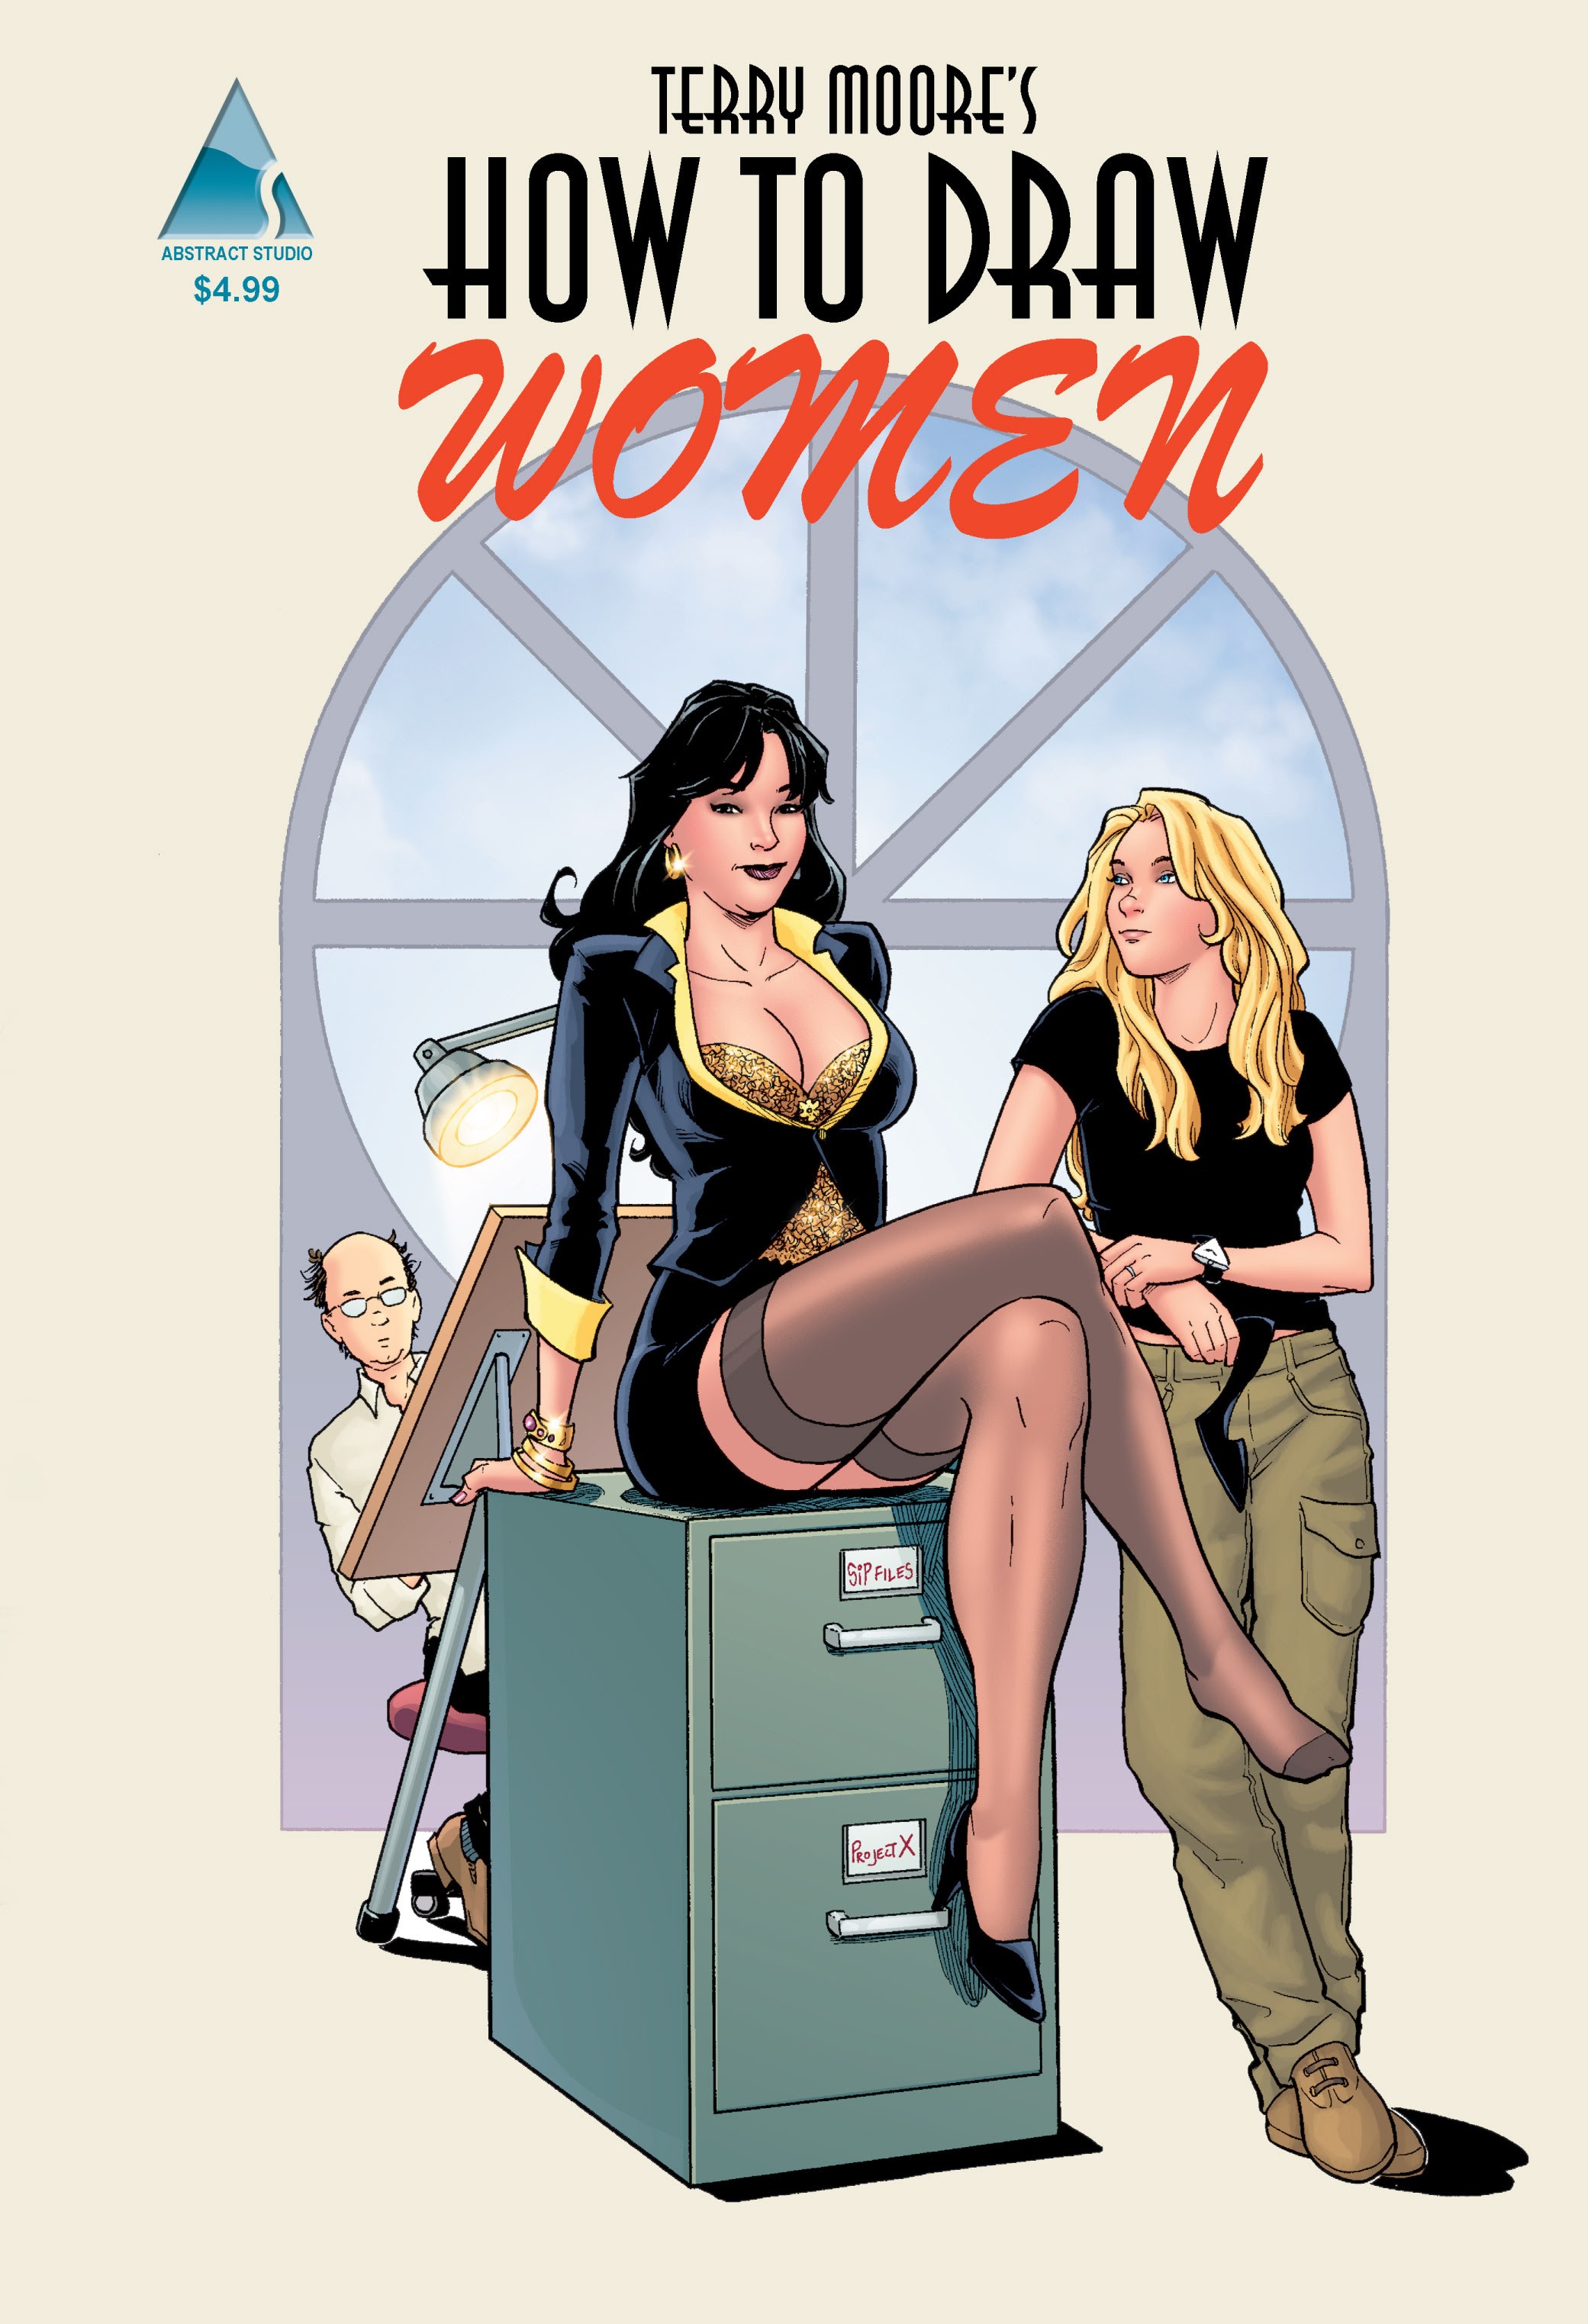 Read online Terry Moore's How to Draw... comic -  Issue # Women - 1